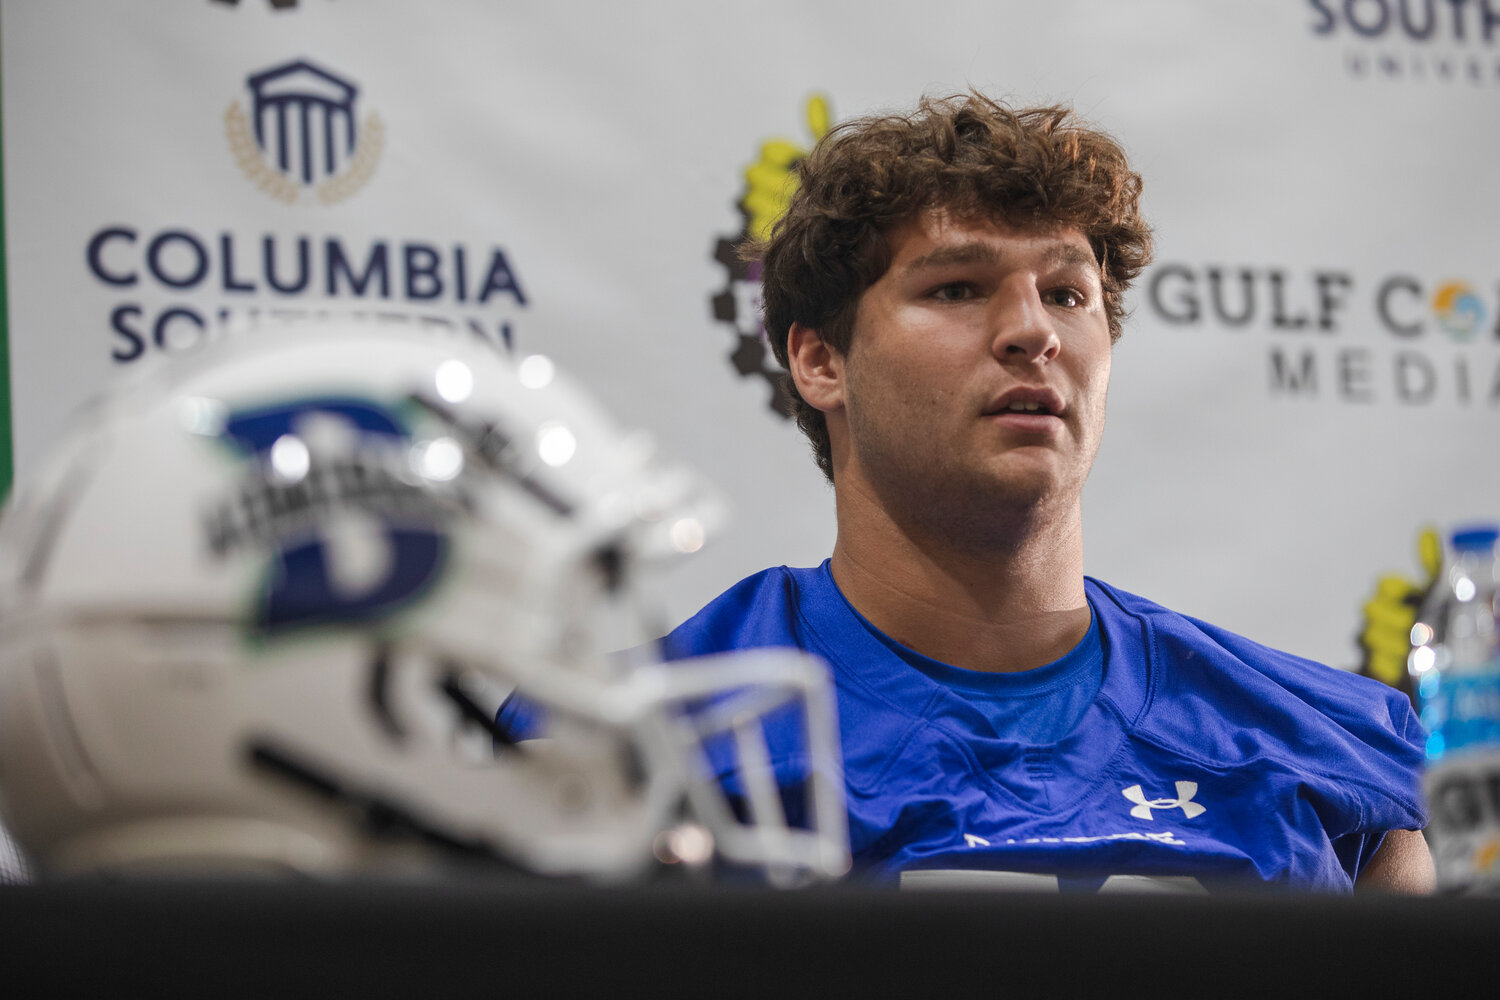 SMU commit and Bayside Academy lineman Graham Uter previewed the upcoming season and laid out his personal and team goals at the second-annual Gulf Coast Media Day at the Orange Beach Event Center on July 27. The 6-foot-5, 290-pound announced his pledge to the Mustangs on June 17 following his official visit to the campus in Dallas.